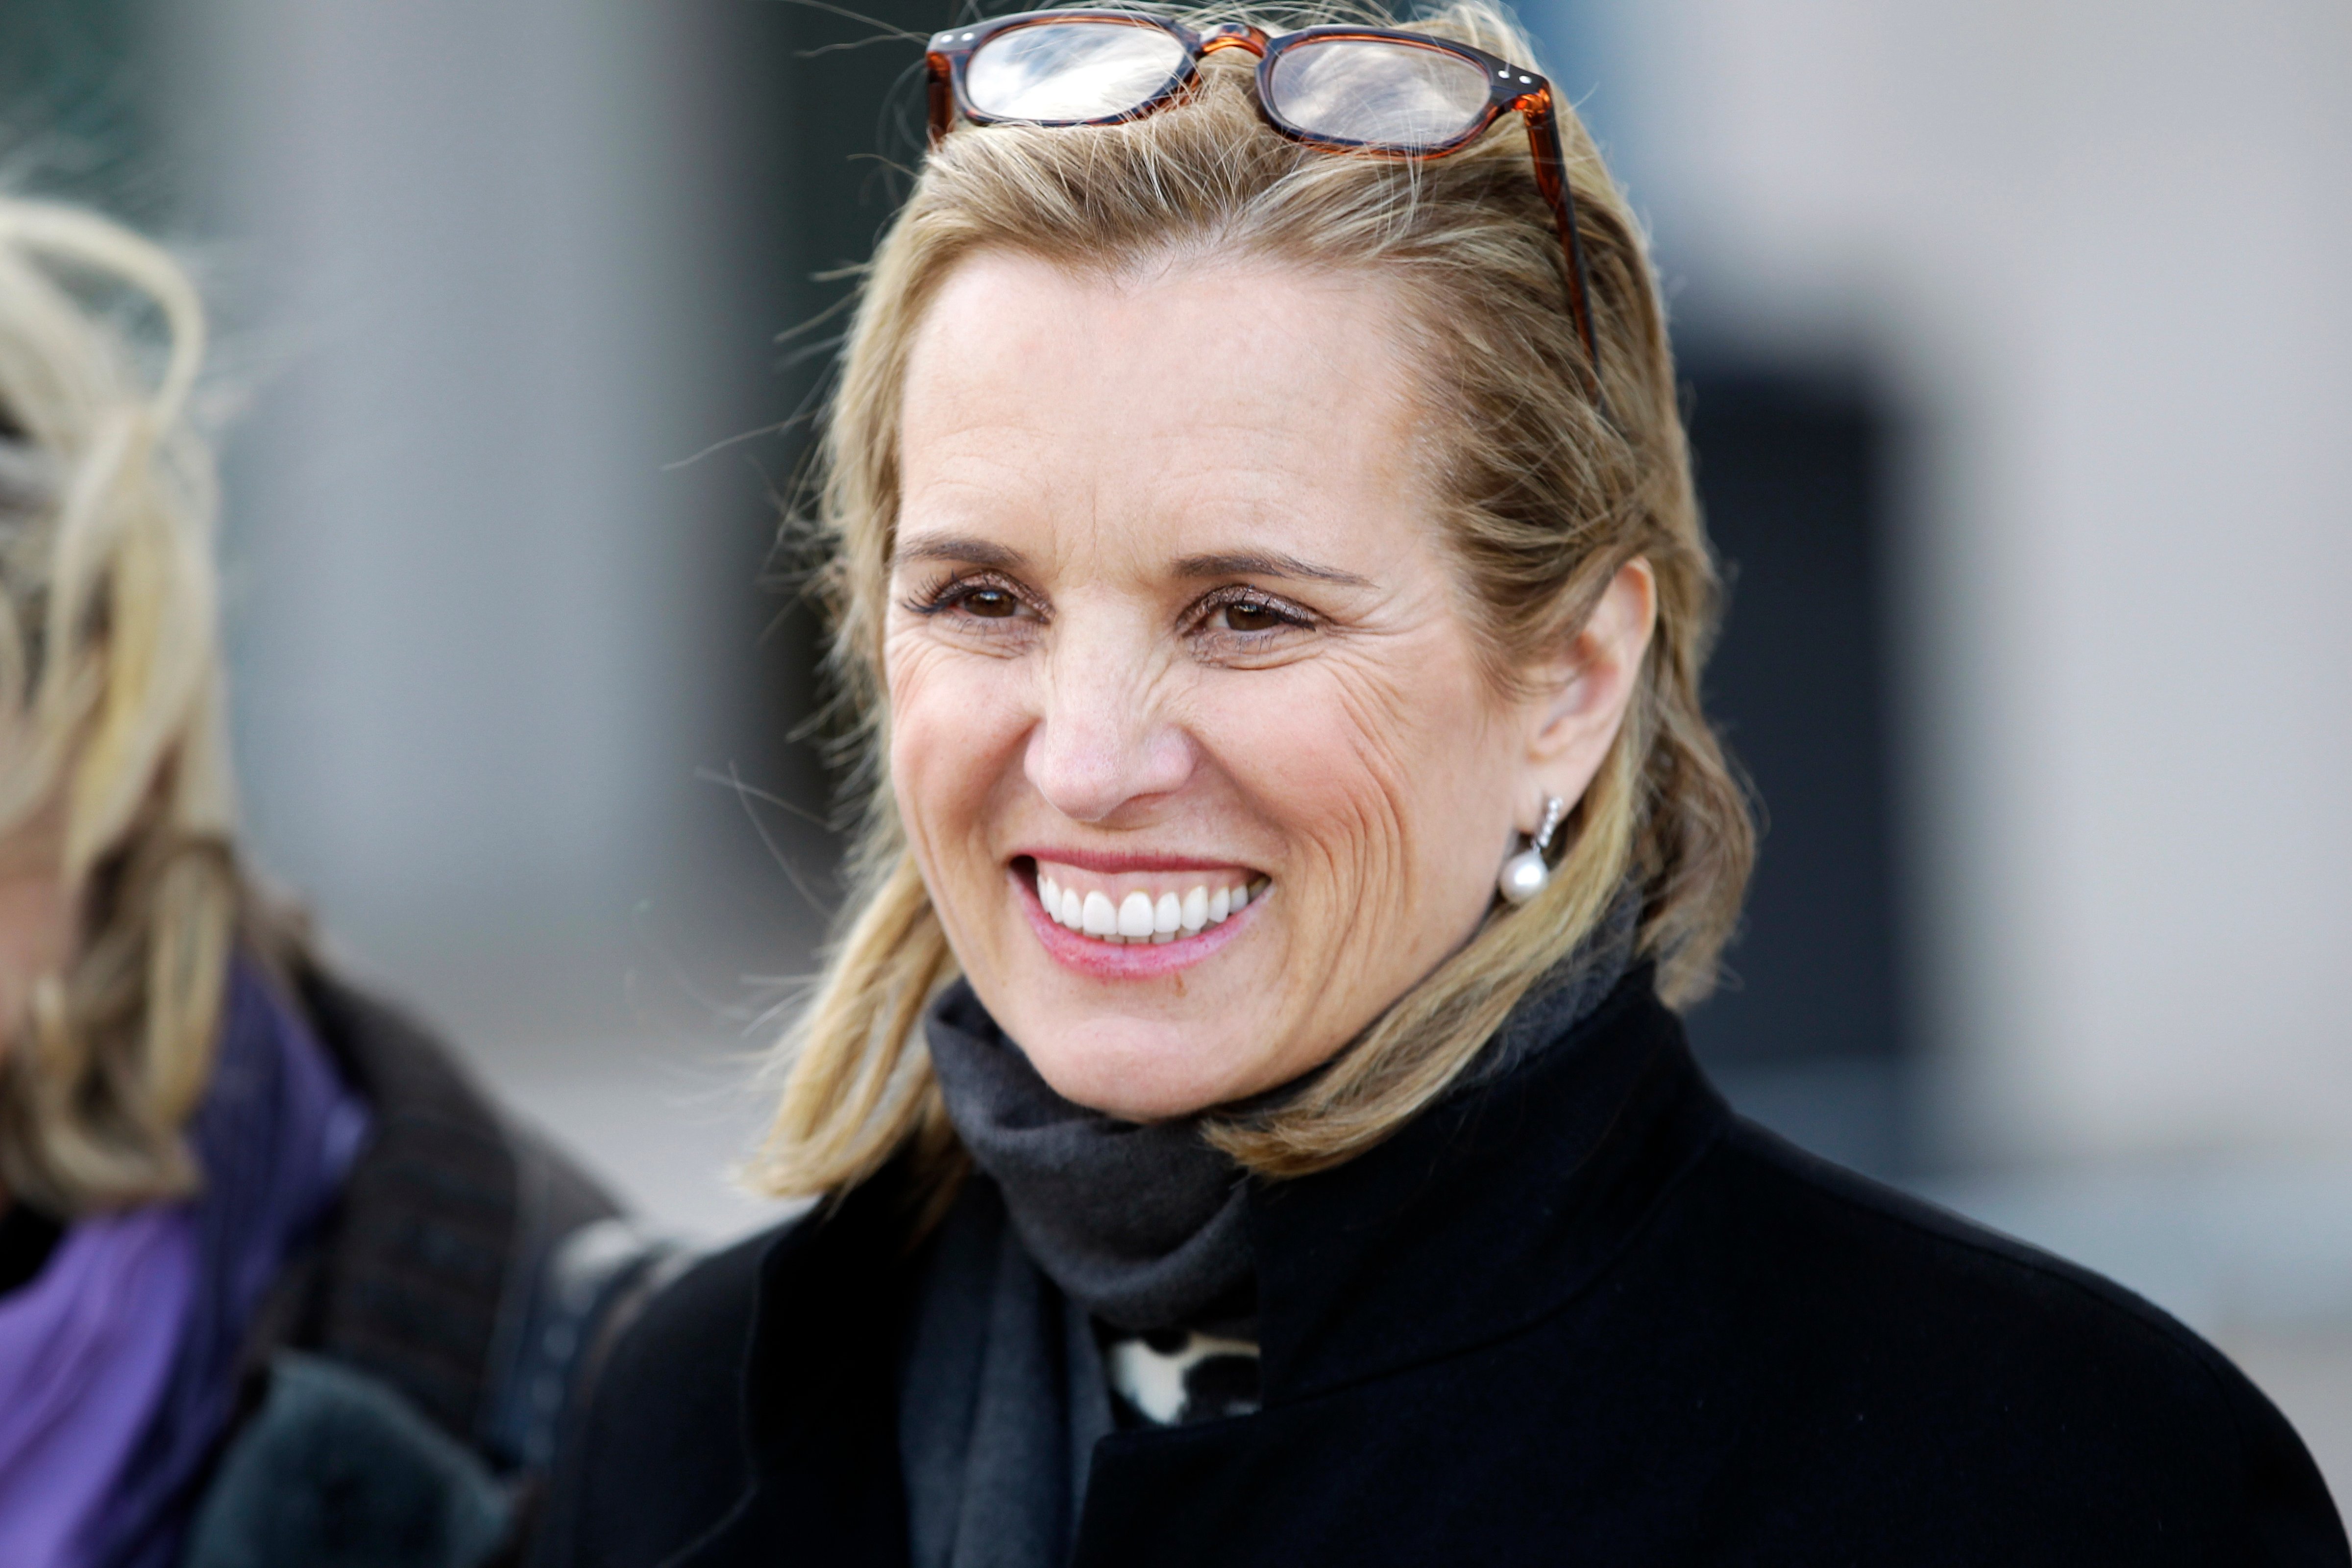 Kerry Kennedy leaves Westchester County courthouse Wednesday, Feb. 26, 2014, in White Plains, N.Y. (Frank Franklin II—AP)